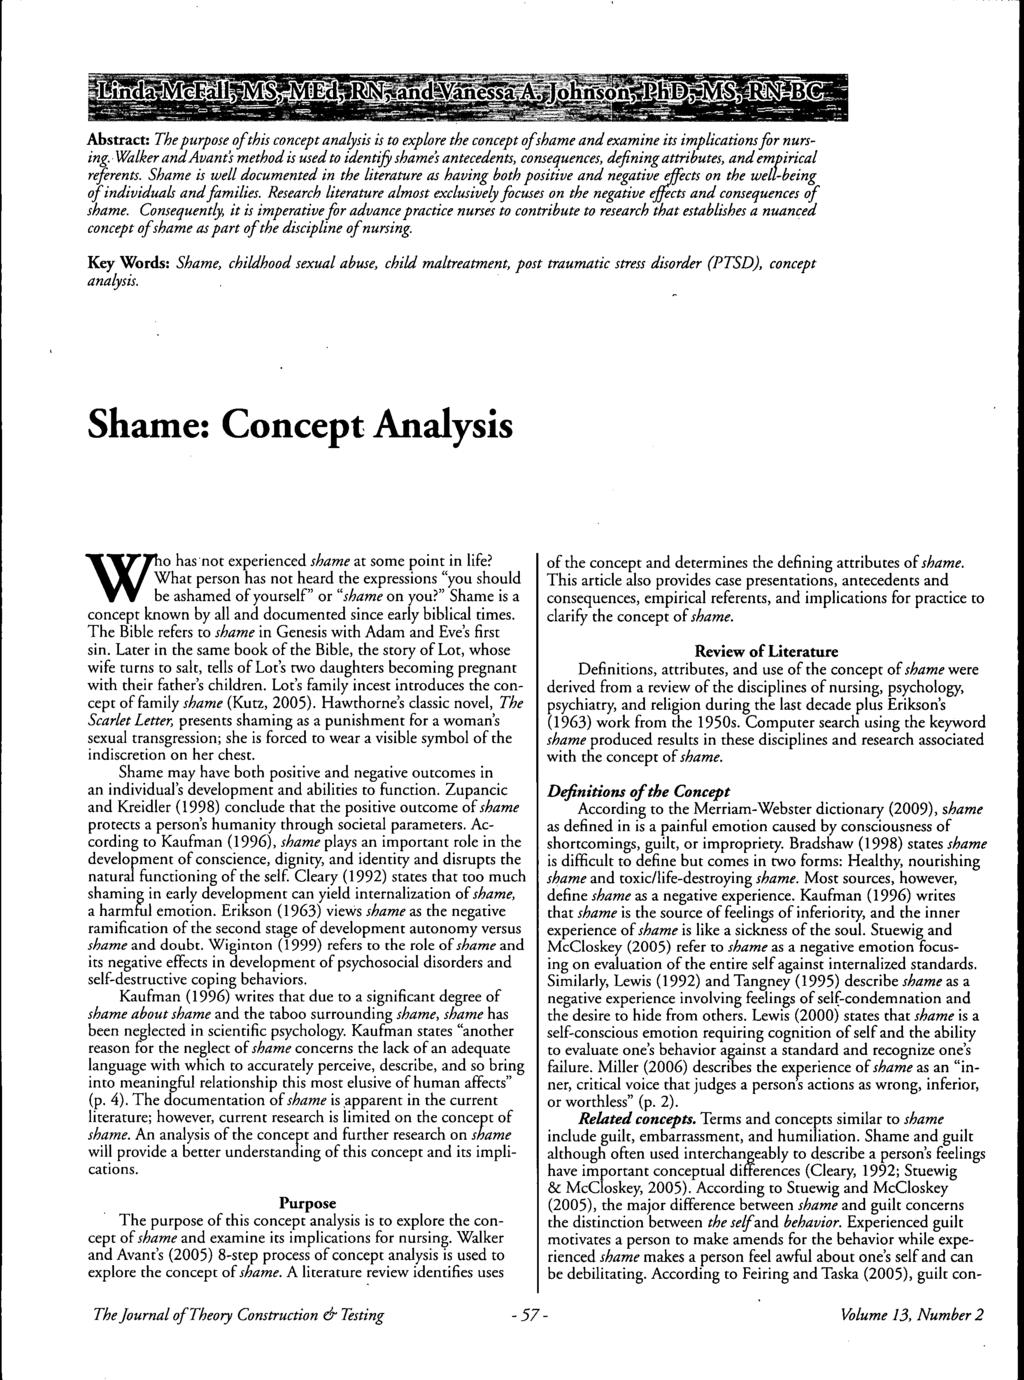 Abstract: The purpose of this concept analysis is to explore the concept of shame and examine its implications for nursing.